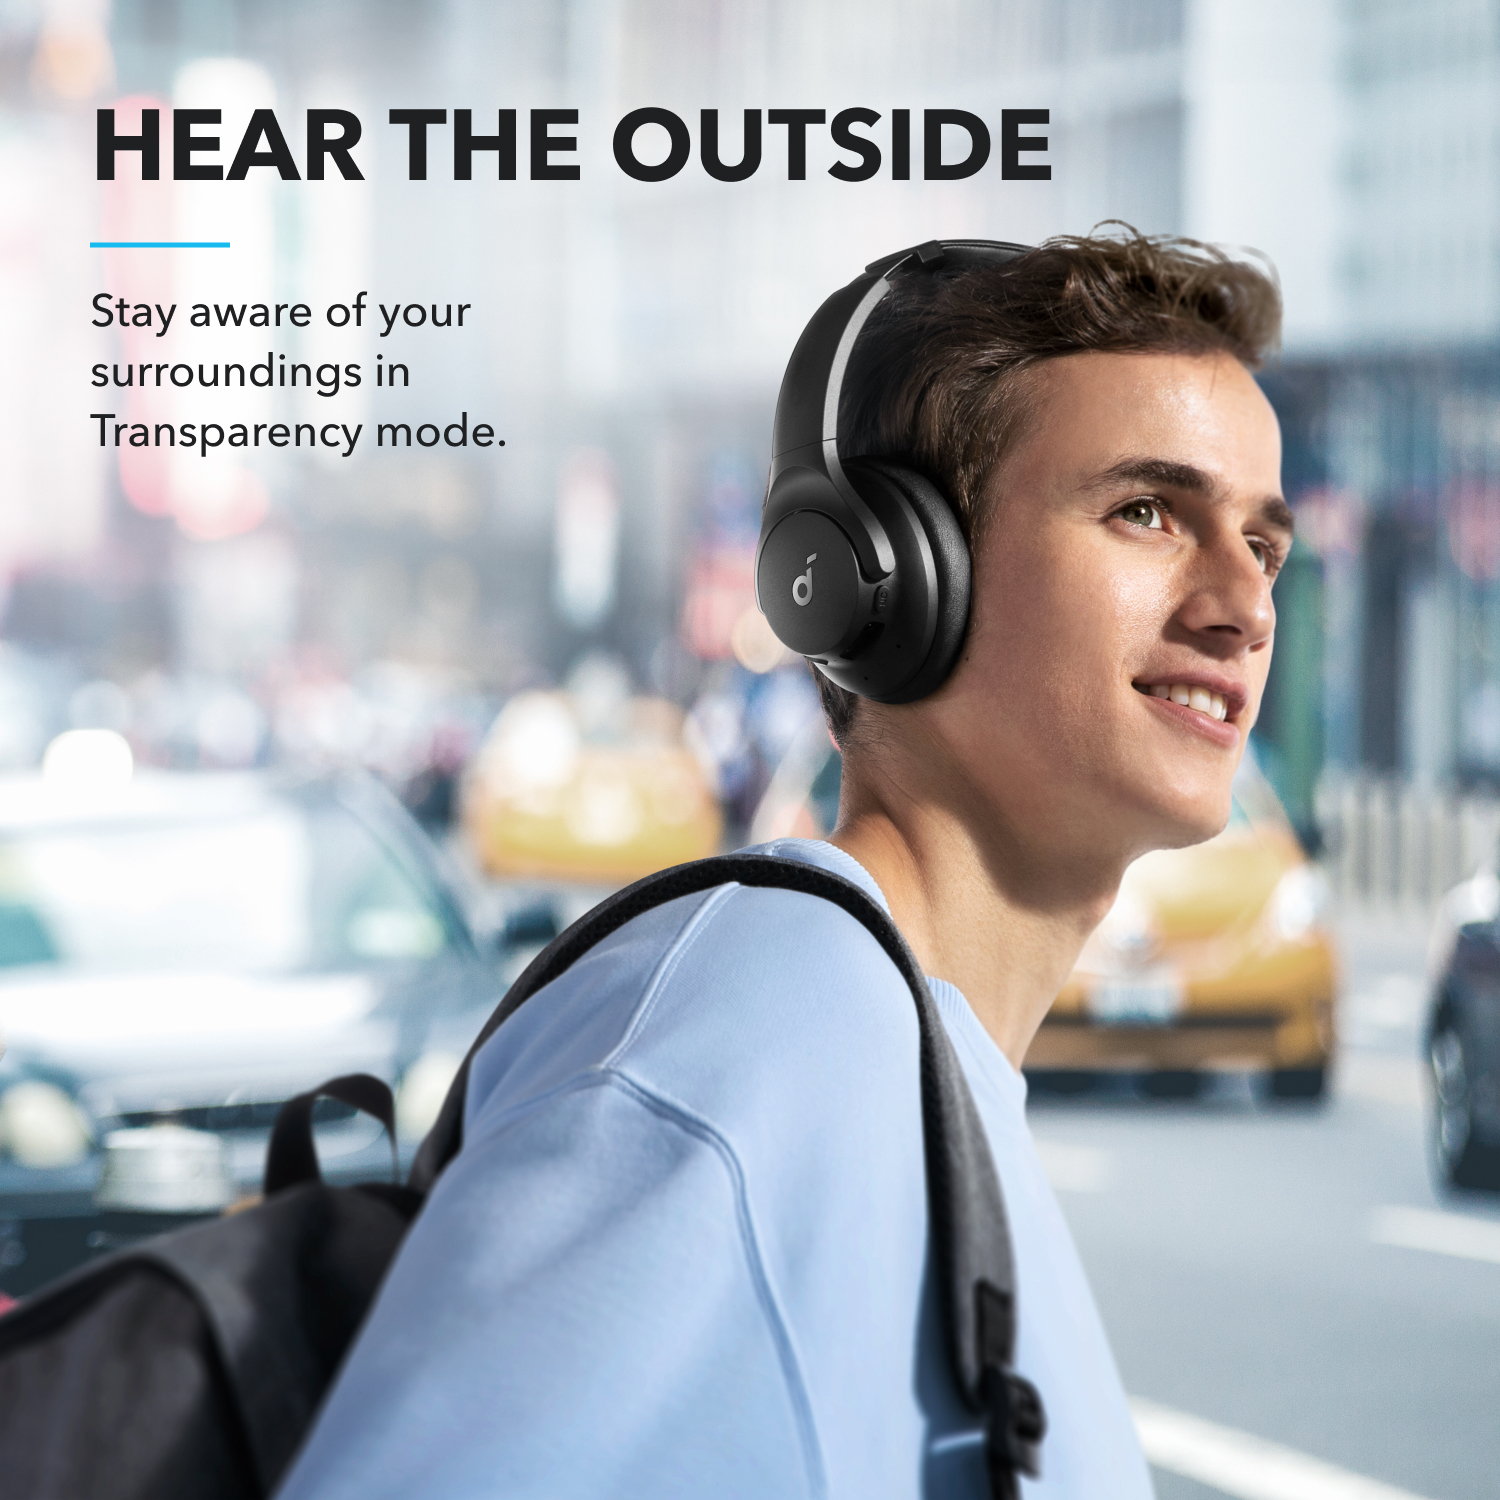 Soundcore by Anker Q20i Hybrid ANC Headphones, Wireless Over-Ear Bluetooth, 40H Long ANC Playtime, Hi-Res Audio, Big Bass, Customize via an App, Transparency Mode, Ideal for Travel-A3004